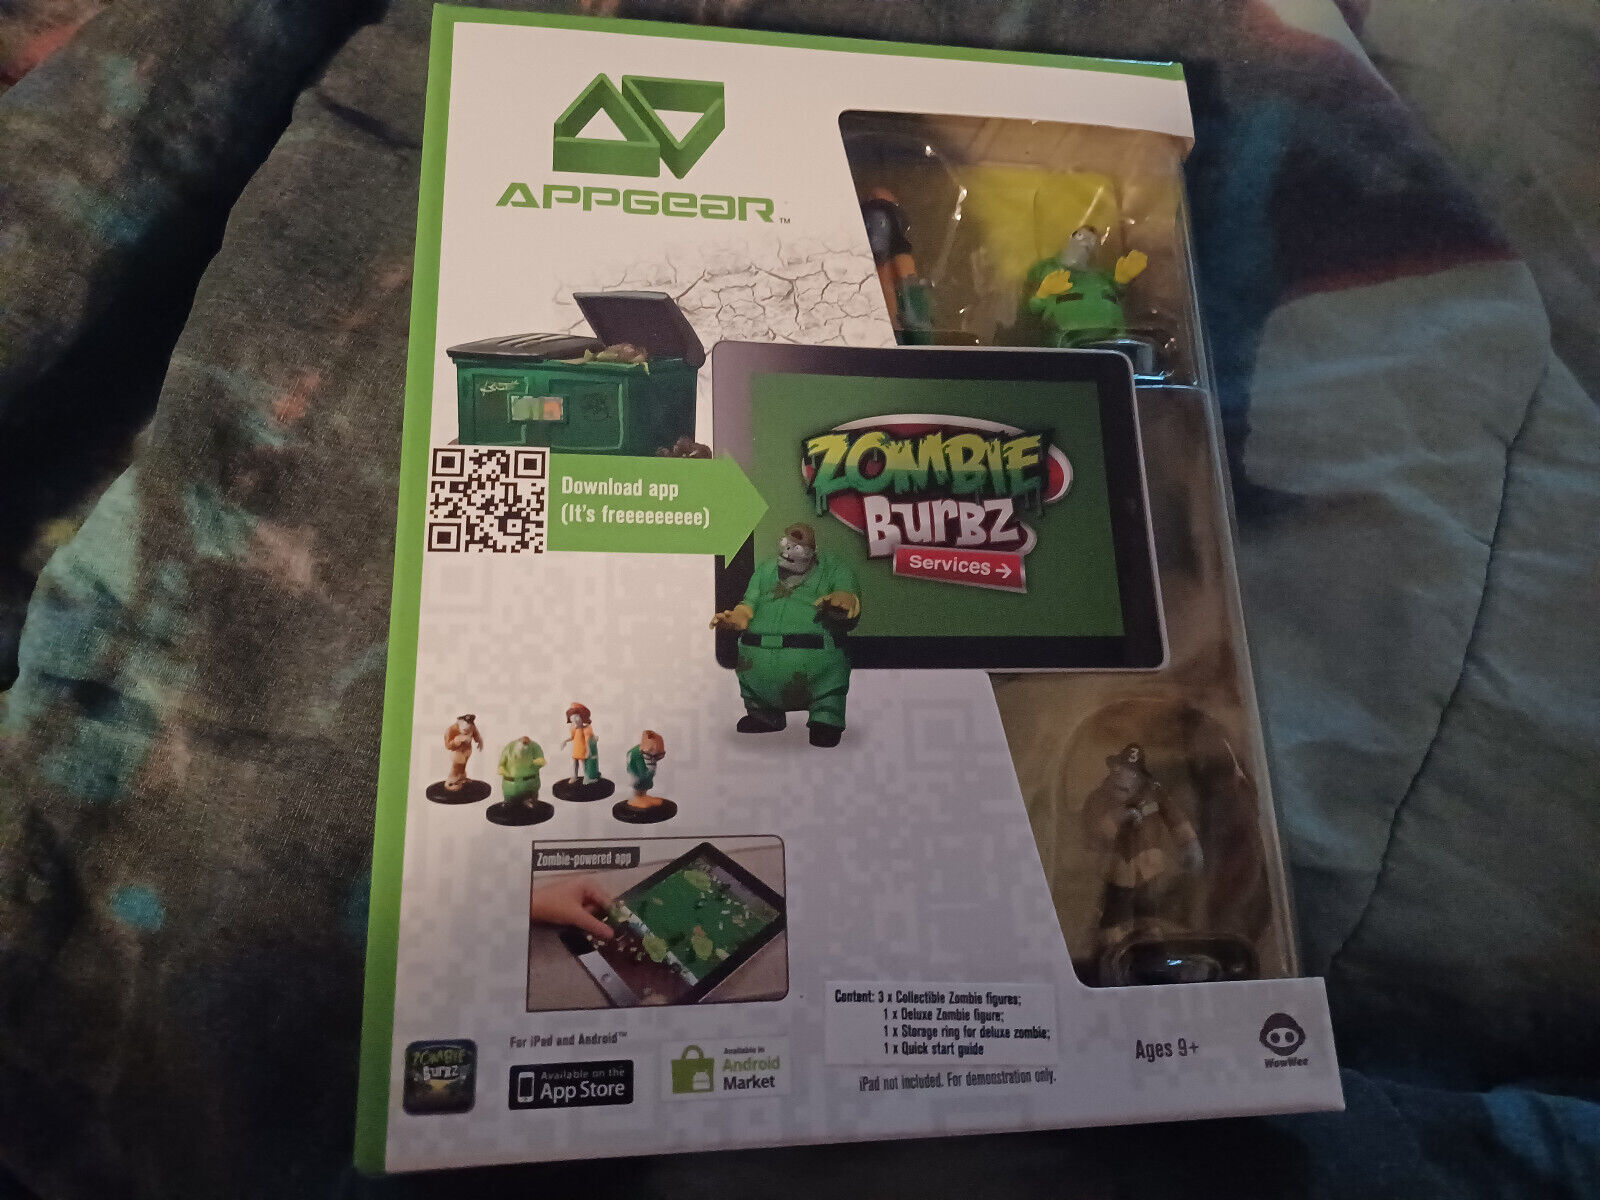 NEW 2011 APPGEAR Zombie Burbz Services Amplified Reality Game iOS iPad Android